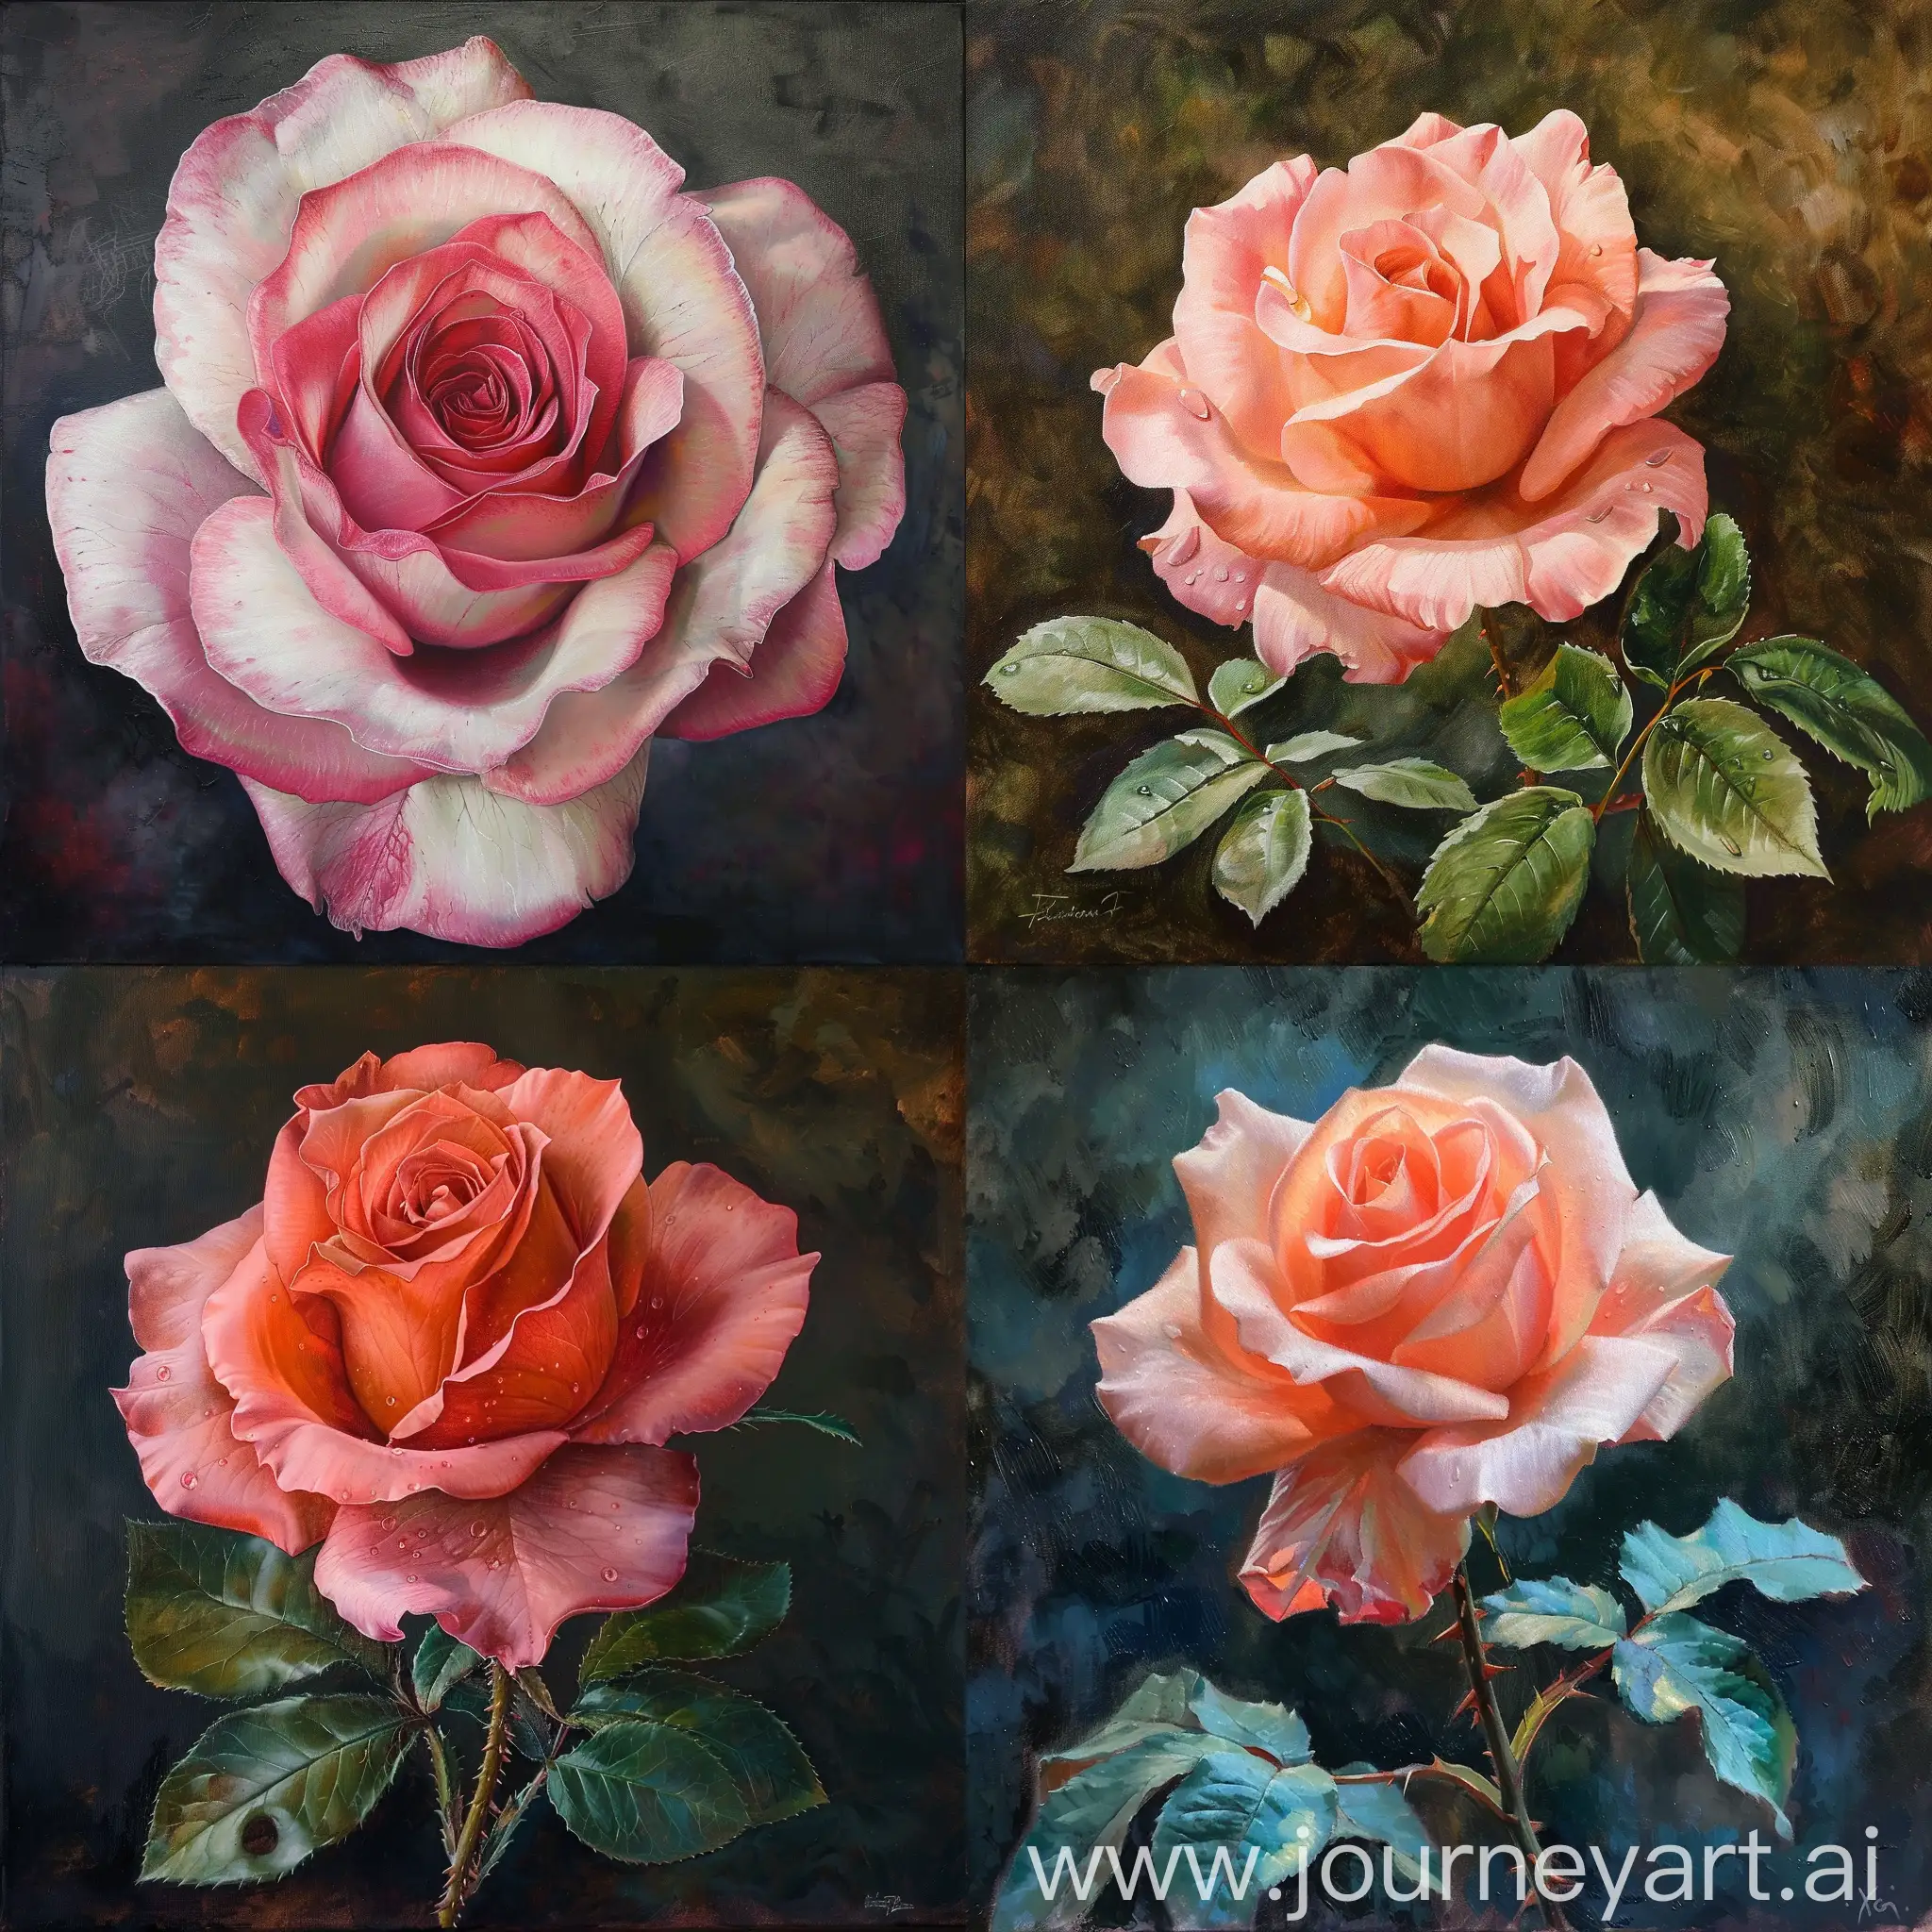 Vibrant-Rose-Painting-Captivating-Floral-Artwork-in-Square-Format